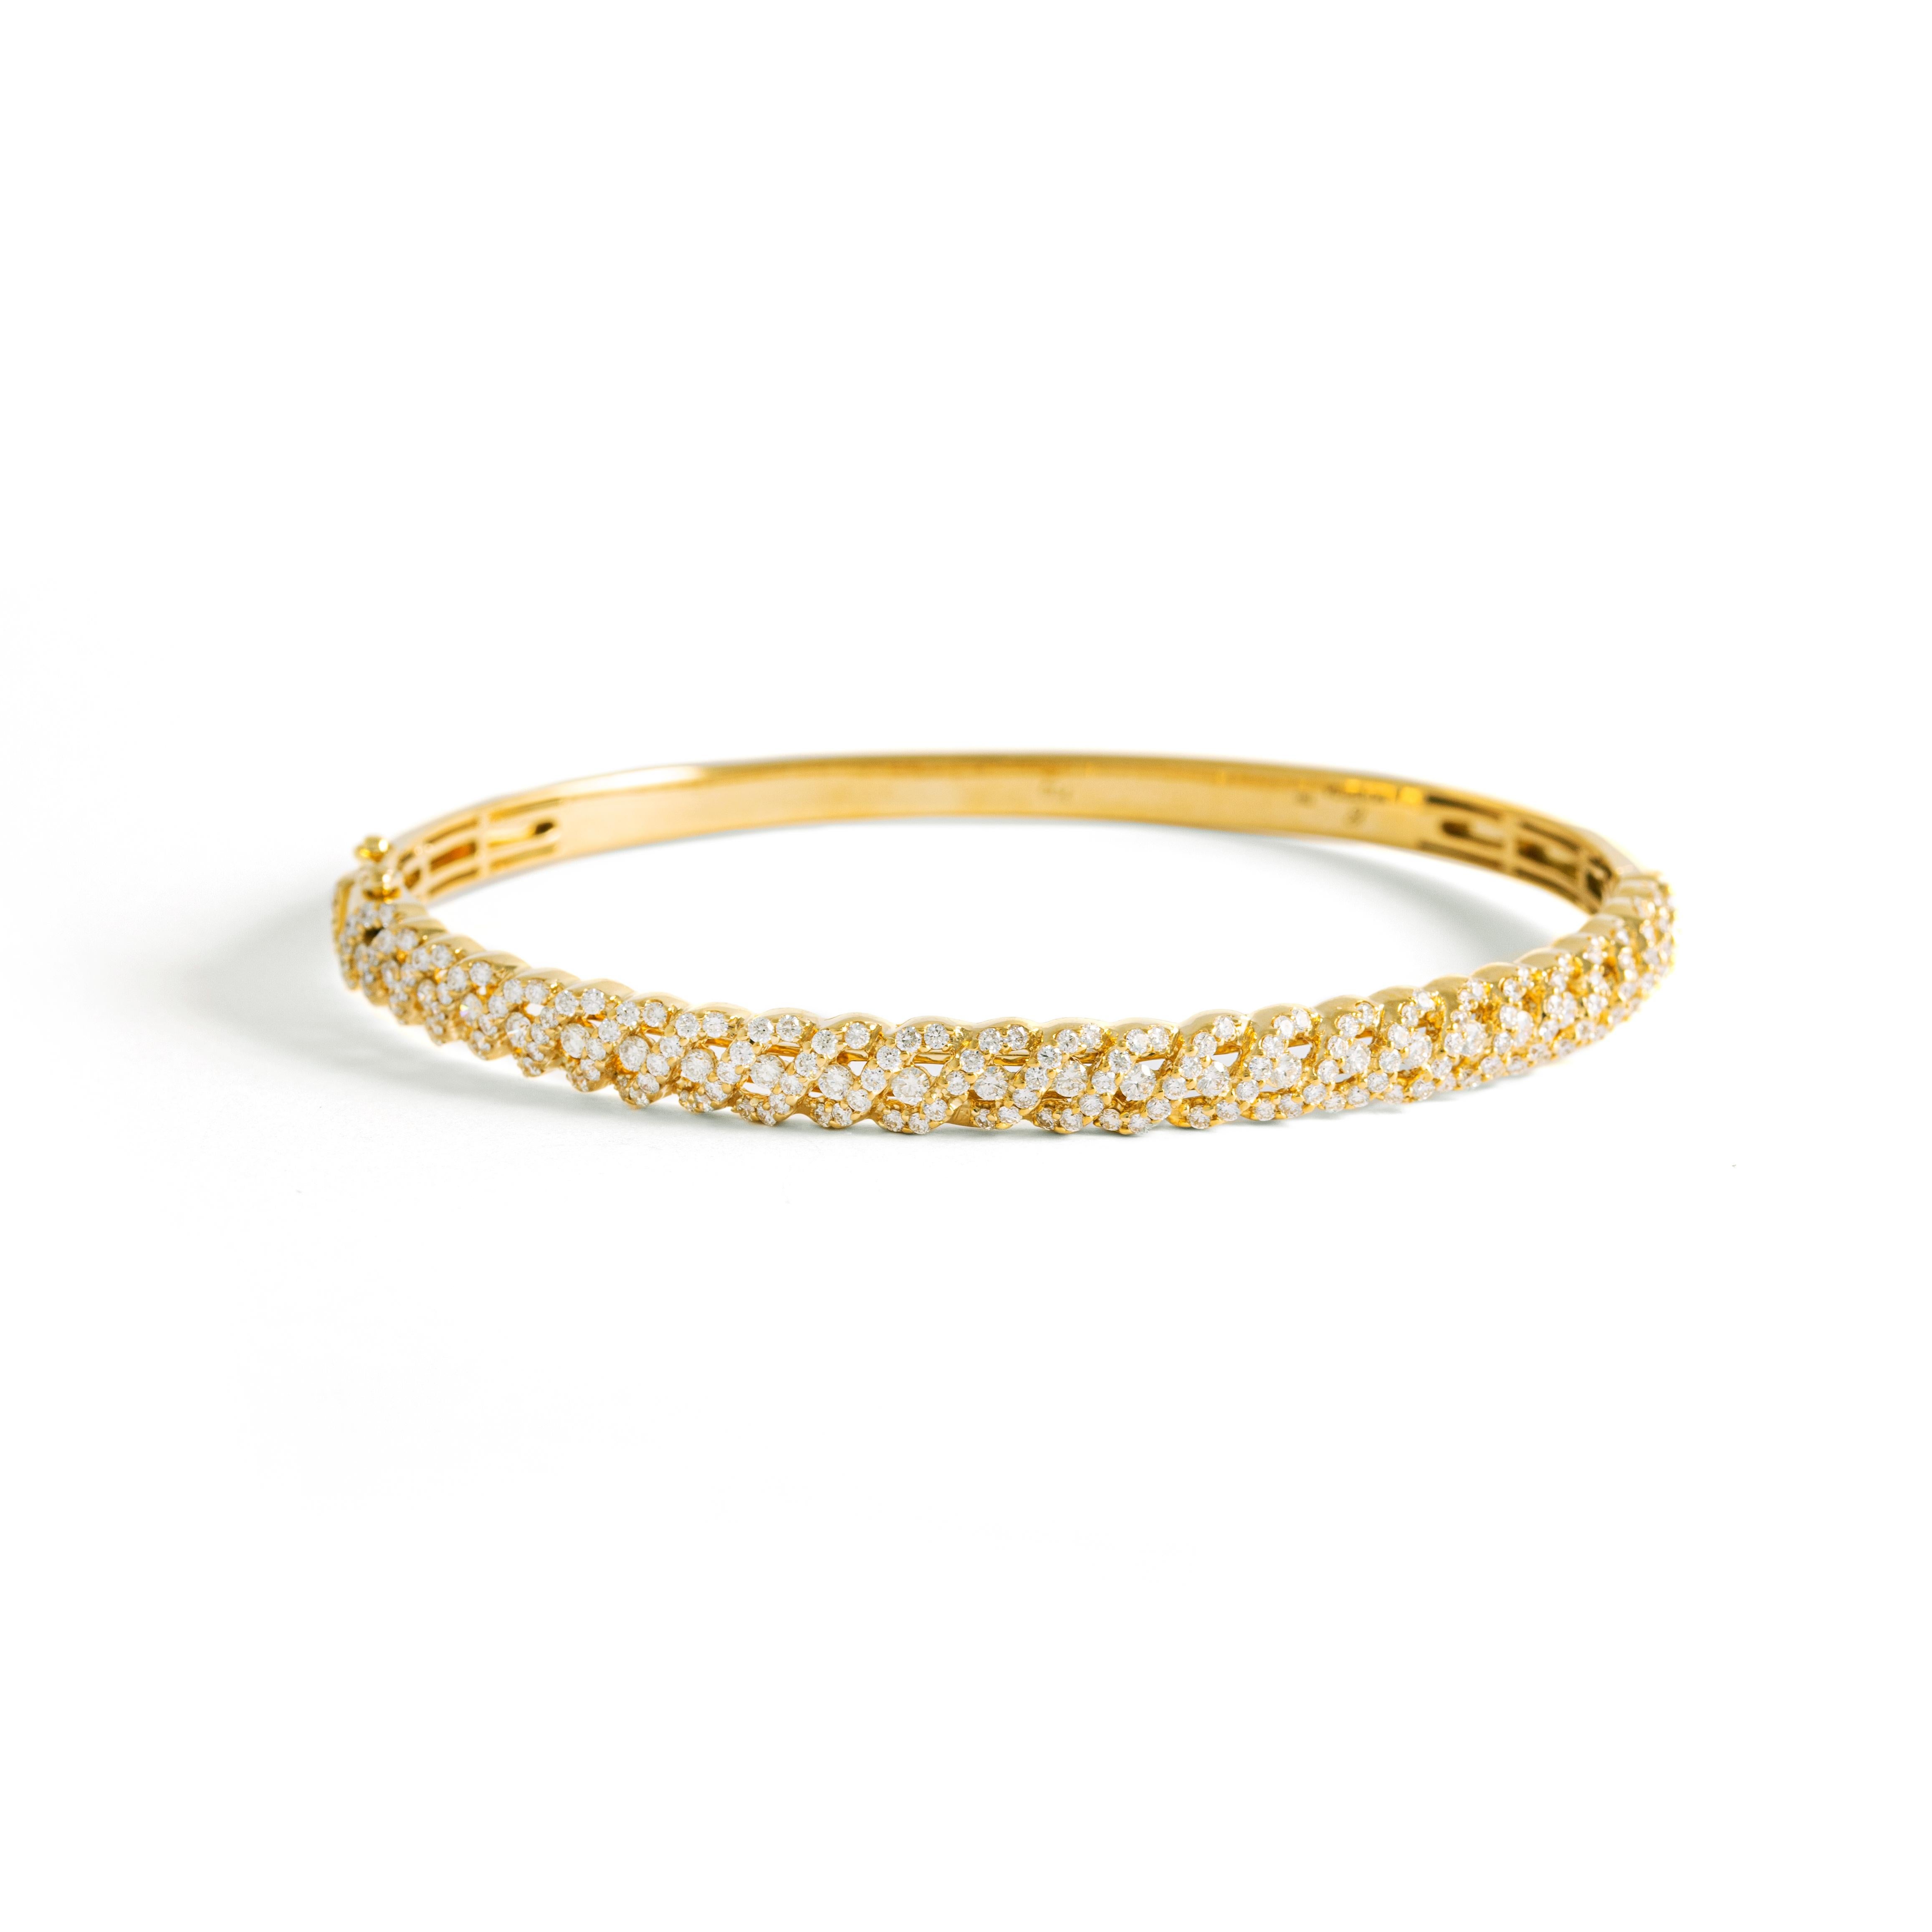 Bangle in 18kt yellow gold set with 205 diamonds 2.23 cts  

Inner circumference: Approximately 18.84 centimeters ( 7.42 inches)

Total weight: 23.07 grams.

Width: 0.50 centimeters ( 0.20 inches).
